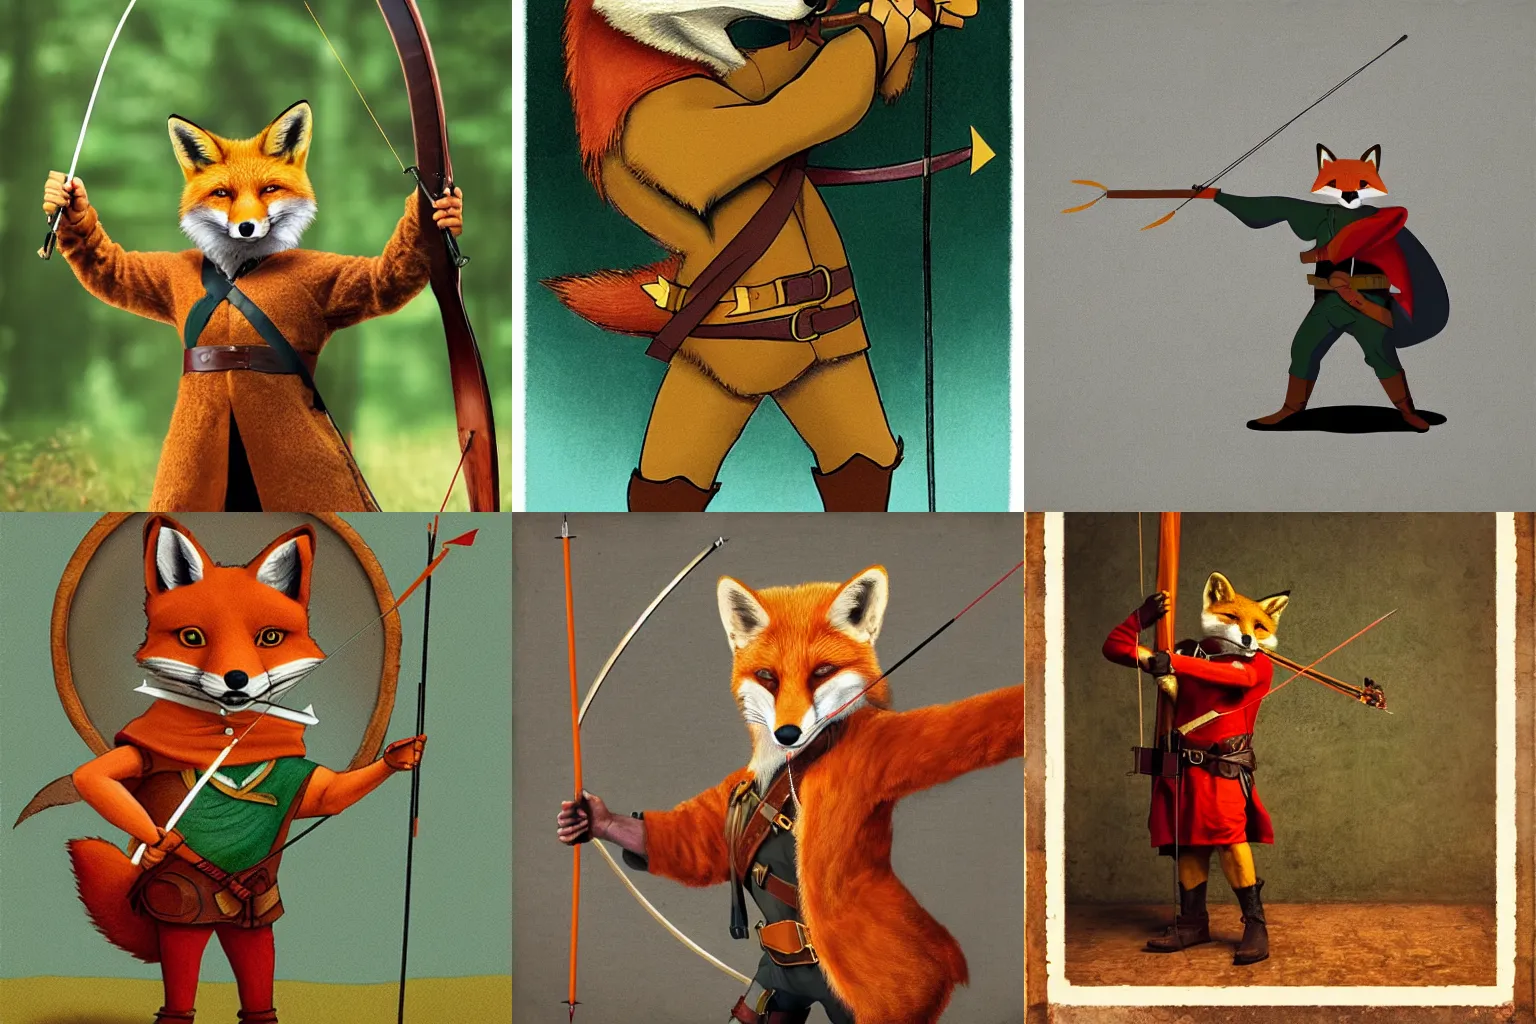 Prompt: Robin Hood as an Anthropomorphic Red Fox holding a Crossbow photograph in the style of Annie Leibovitz, photorealistic